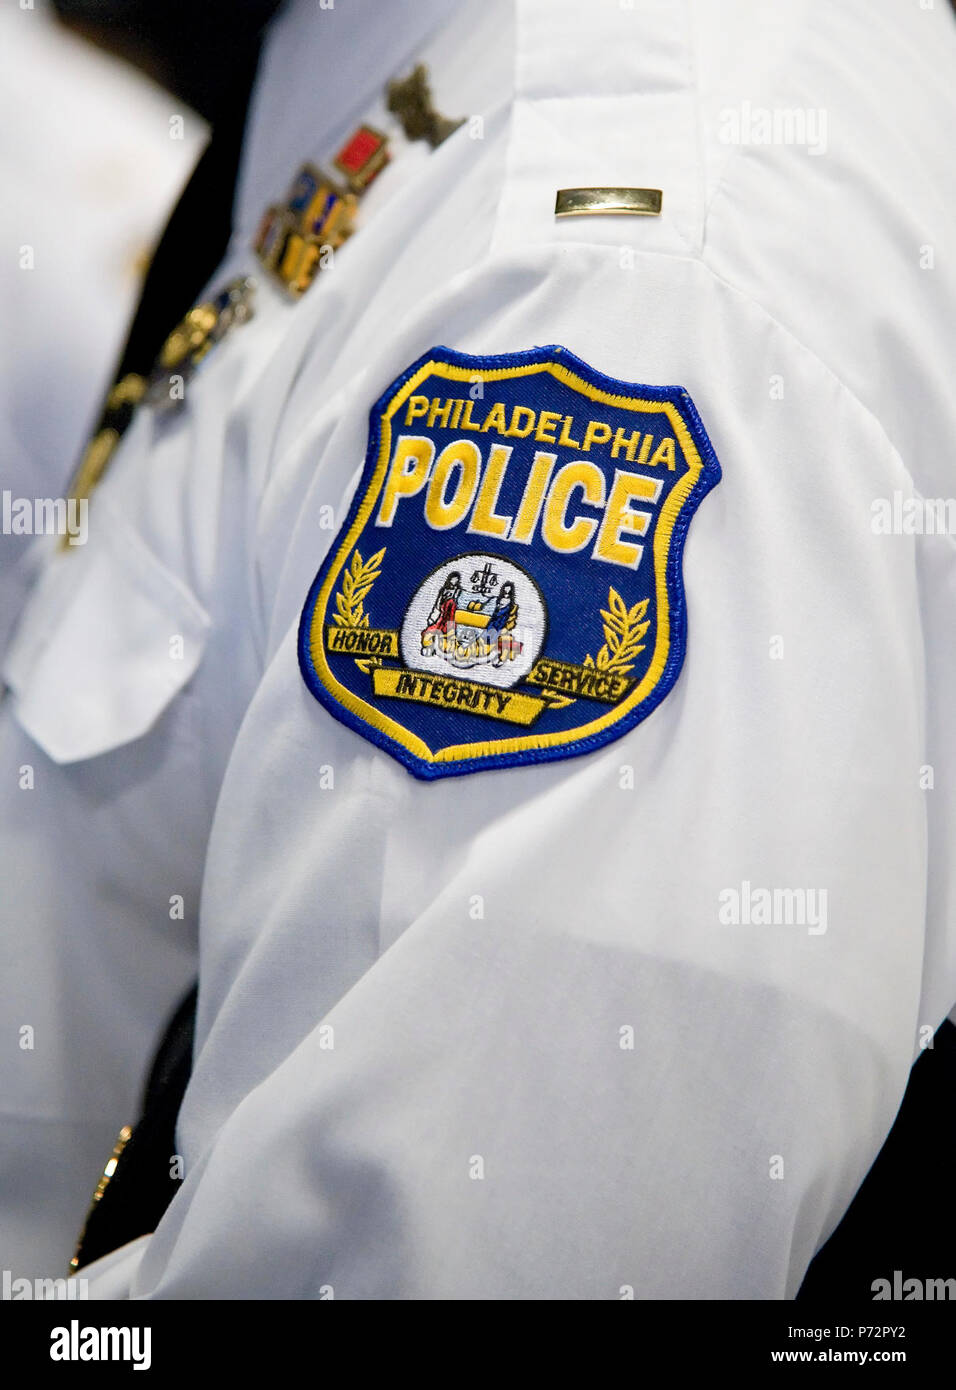 The Philadelphia Police Department, Philadelphia, Pa., patch is worn on the uniform of Lieutenant Austin Fraser, Philadelphia Police Department Firearms Training Unit, May 11, 2017, at Dover Air Force Base, Del. Fraser and 14 other members from the police department toured the Ravens section of the 436th Security Forces Squadron that included a Redman suit training demonstration, and a display of weapons used by Ravens. Stock Photo